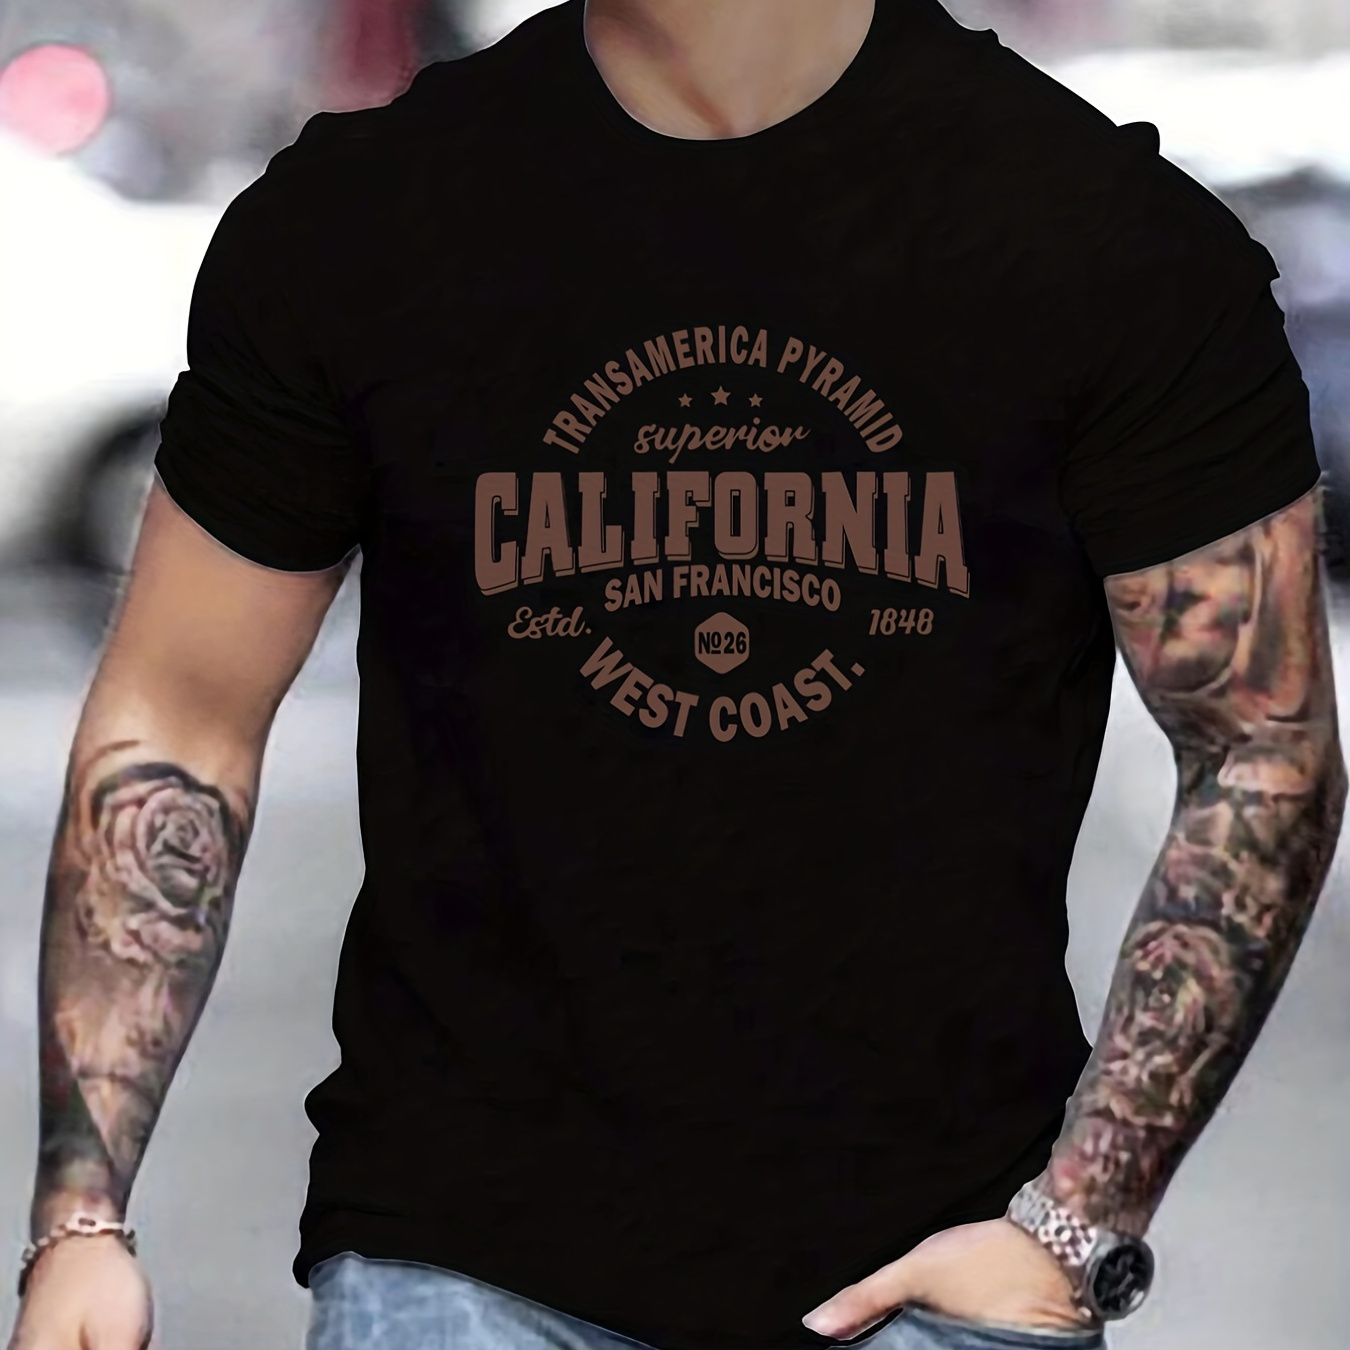 

Mens Casual California West Coast Slightly Stretch Crew Neck Short Sleeve T Shirt, Male Clothes For Summer